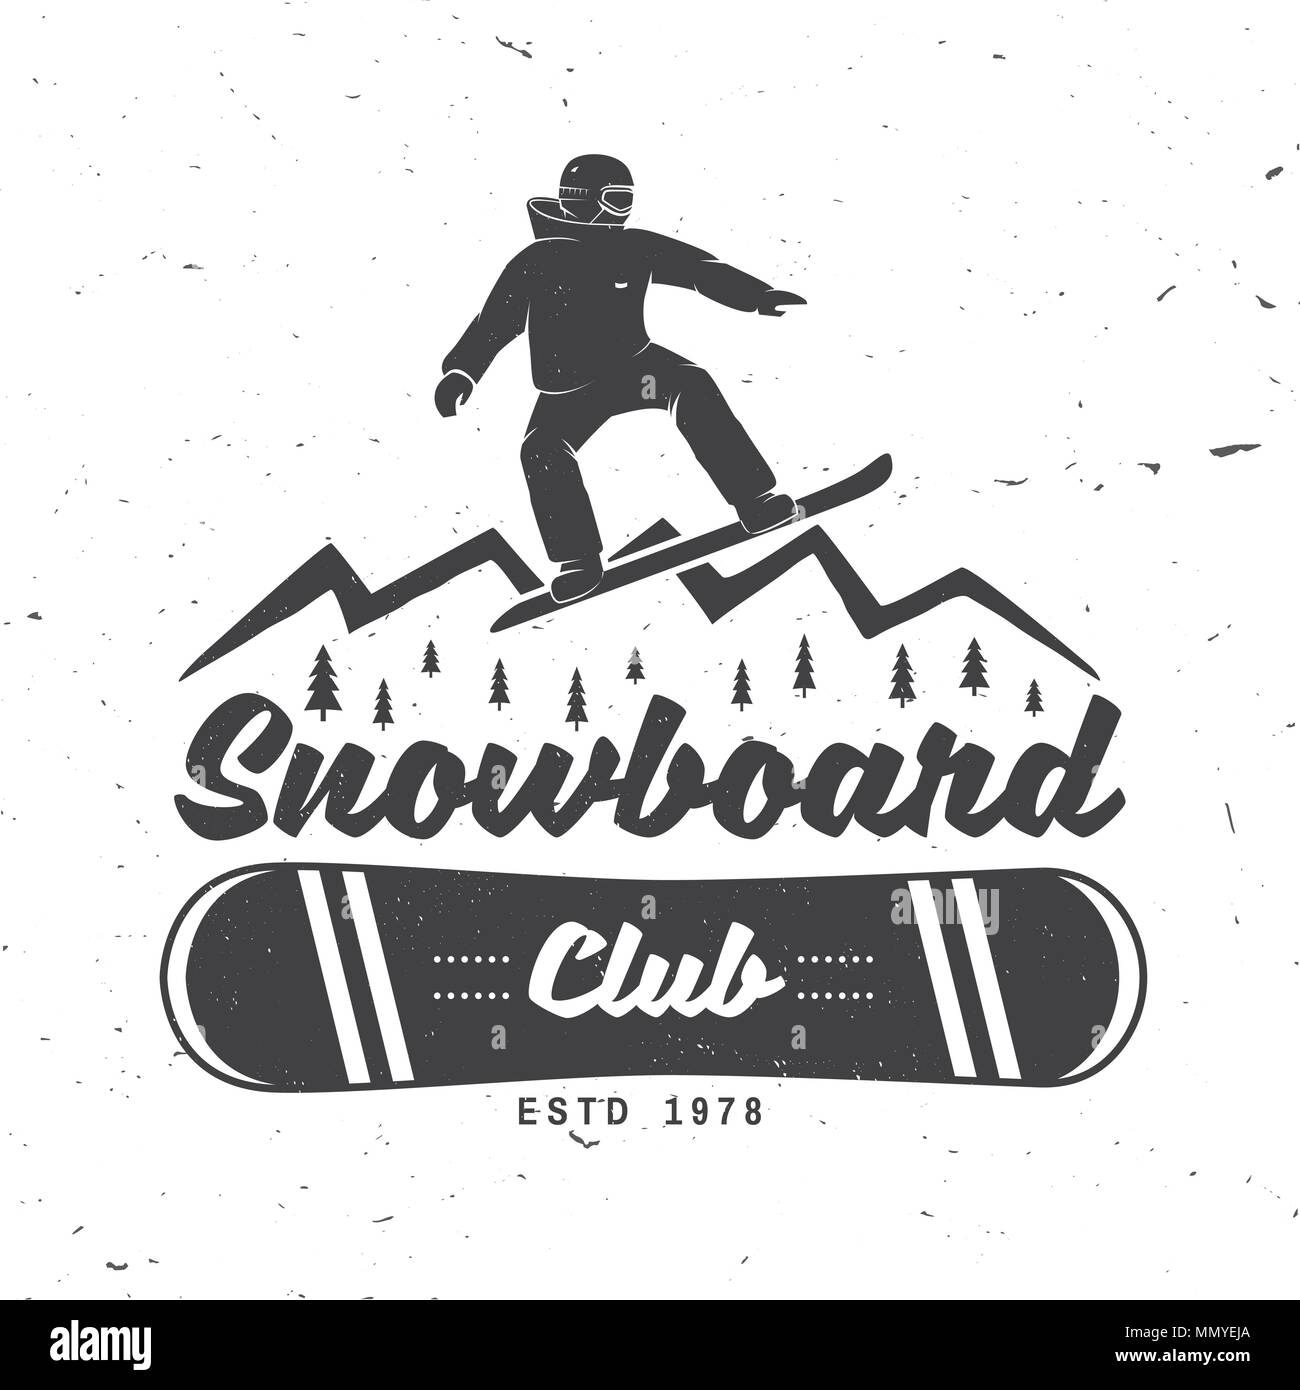 Snowboard Club. Vector illustration. Concept for shirt, print, stamp or tee. Vintage typography design with snowboard and mountain silhouette. Extreme Stock Vector